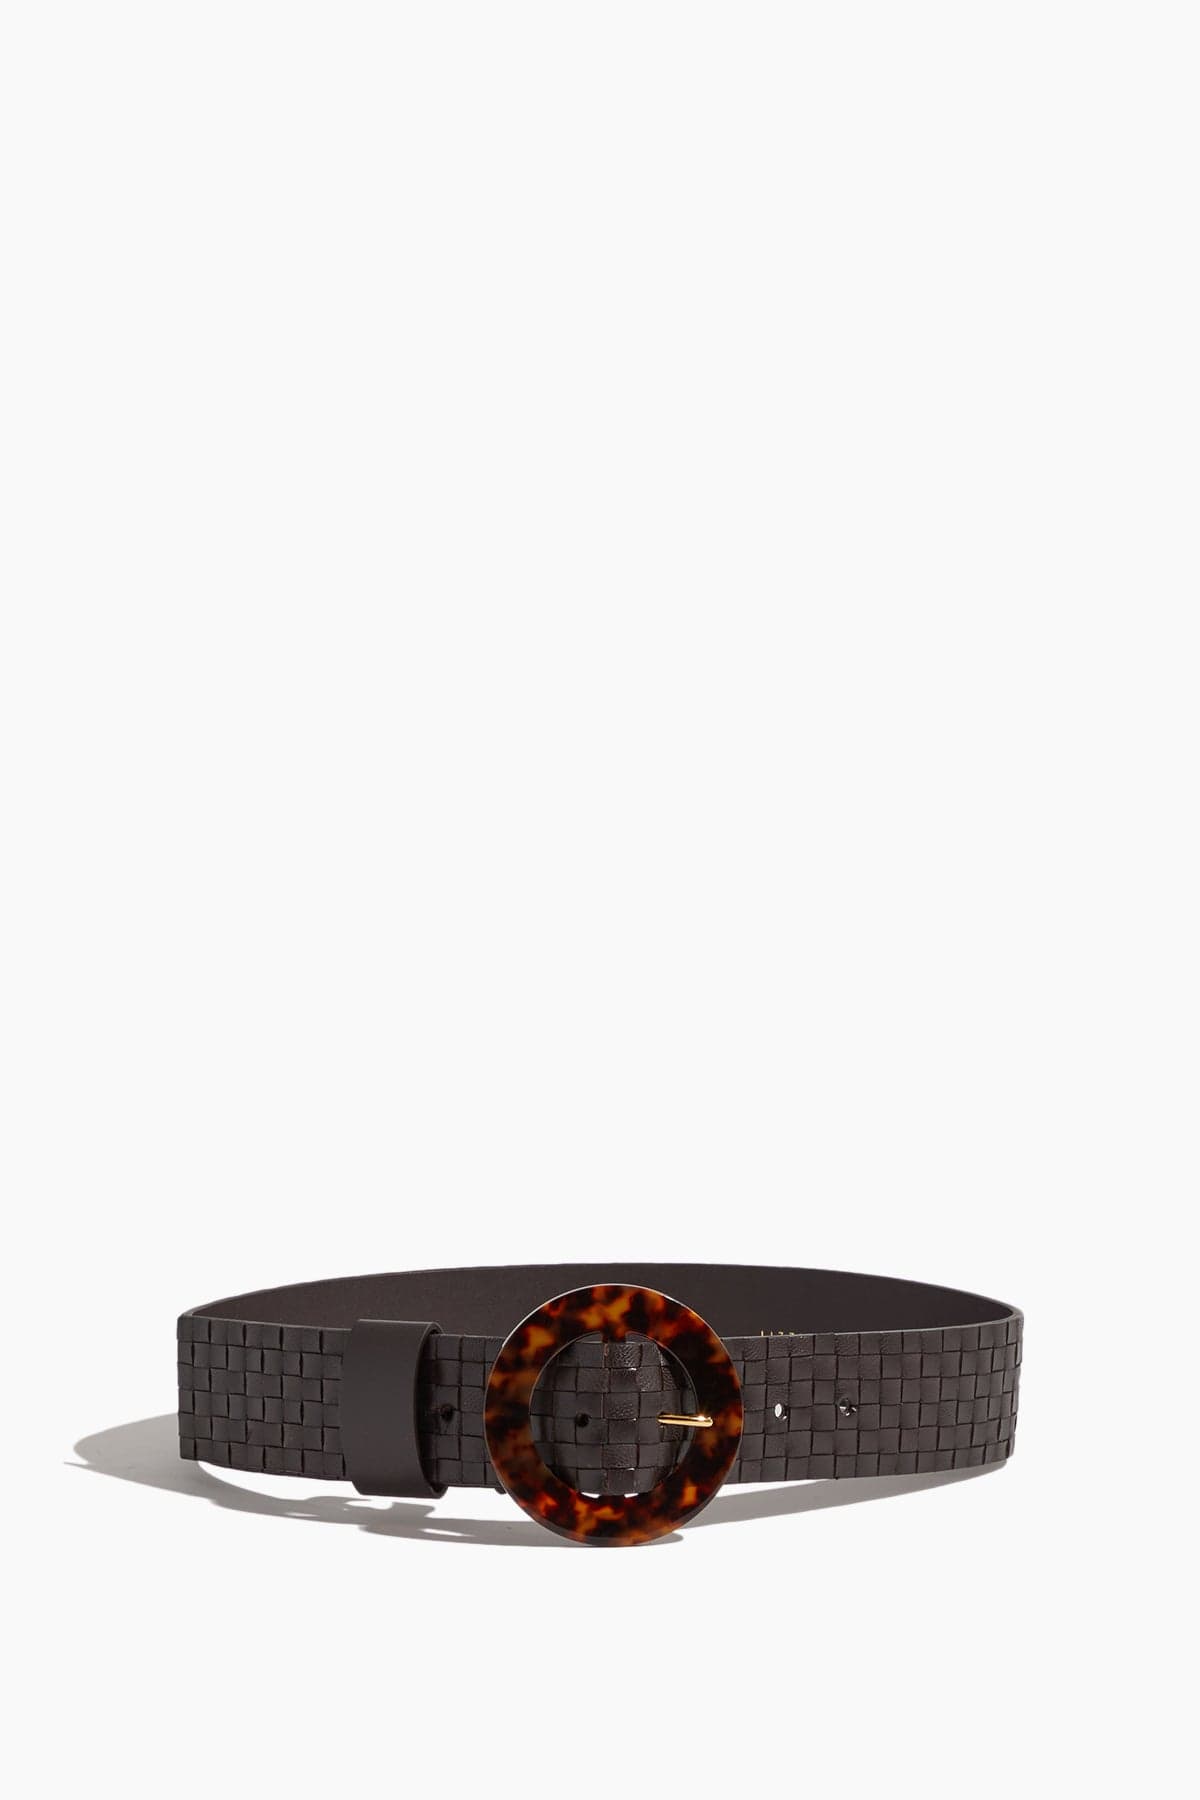 Lizzie Fortunato Belts Louise Leather Belt in Brown